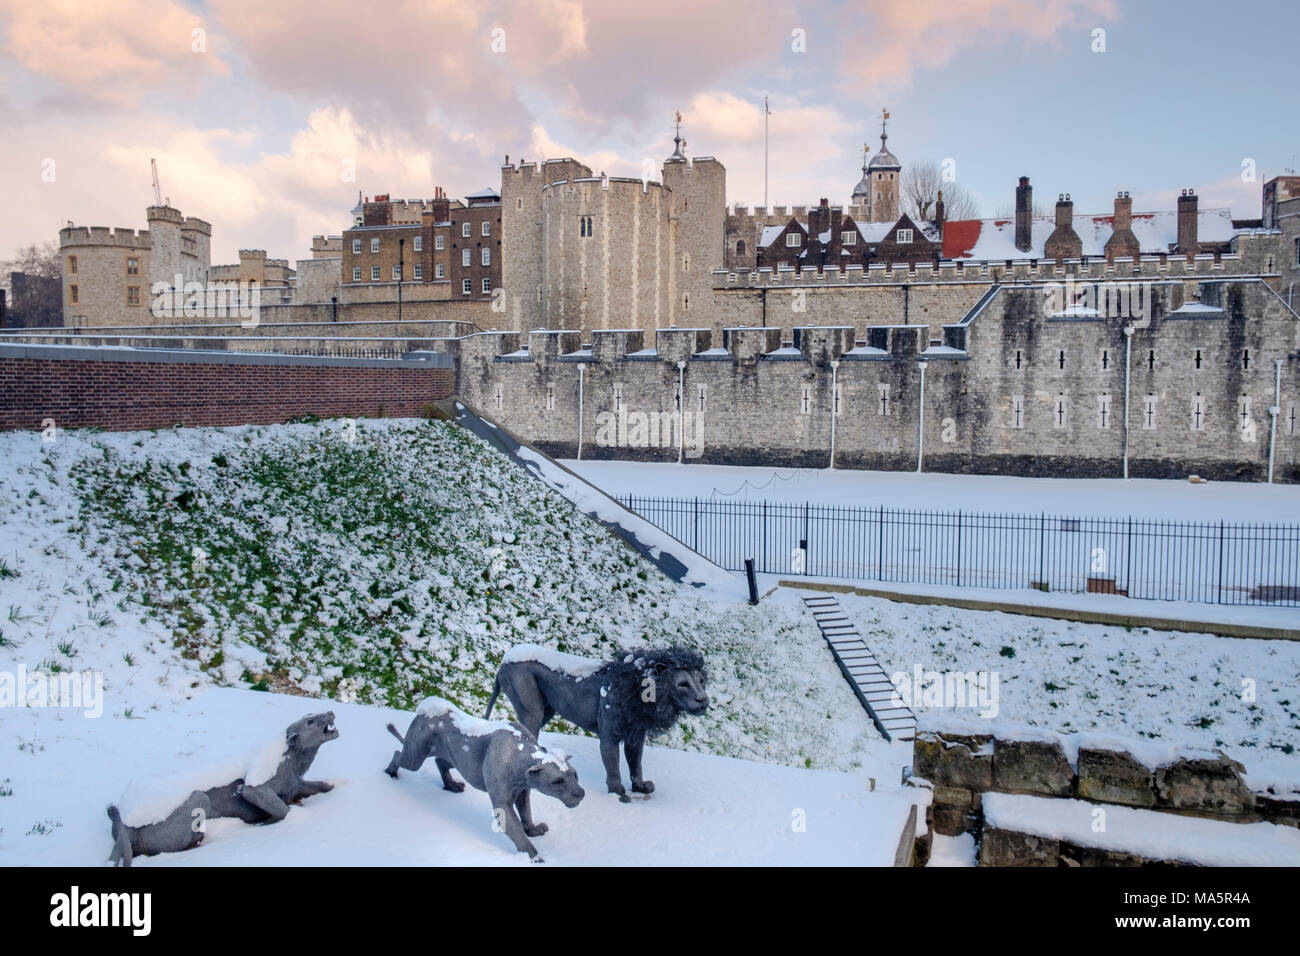 The Tower of London castle, Royal Palace and home to the Crown Jewels in the snow Stock Photo